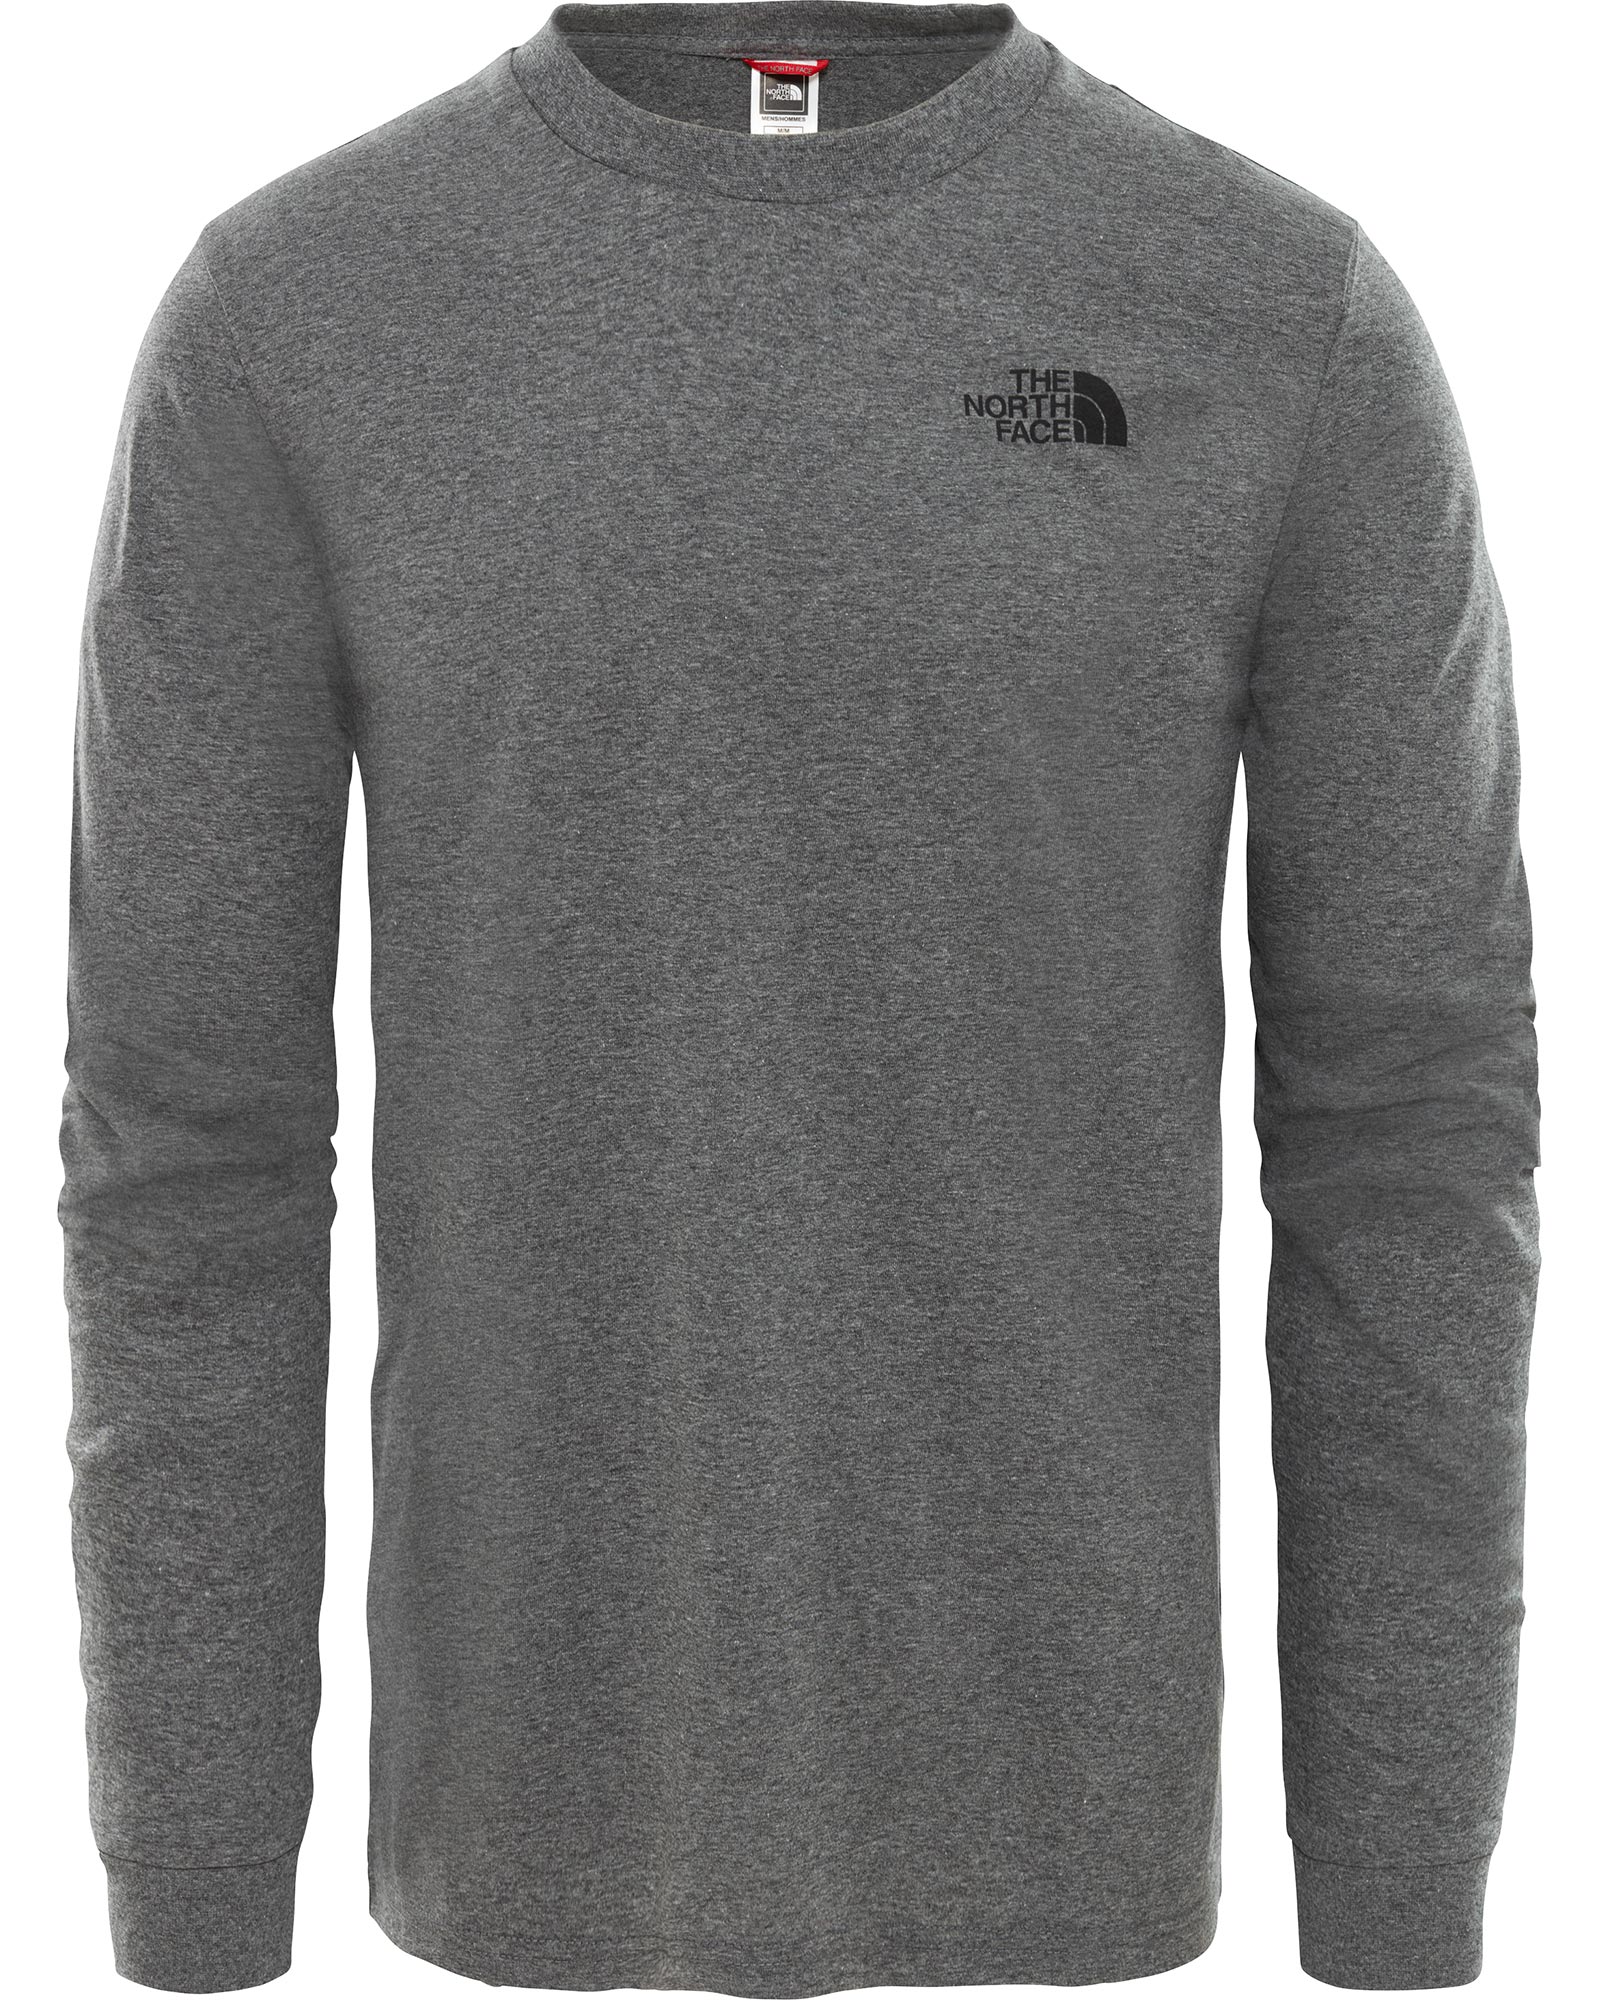 The North Face Simple Dome Men’s Long Sleeve T Shirt - TNF Medium Grey Heather M